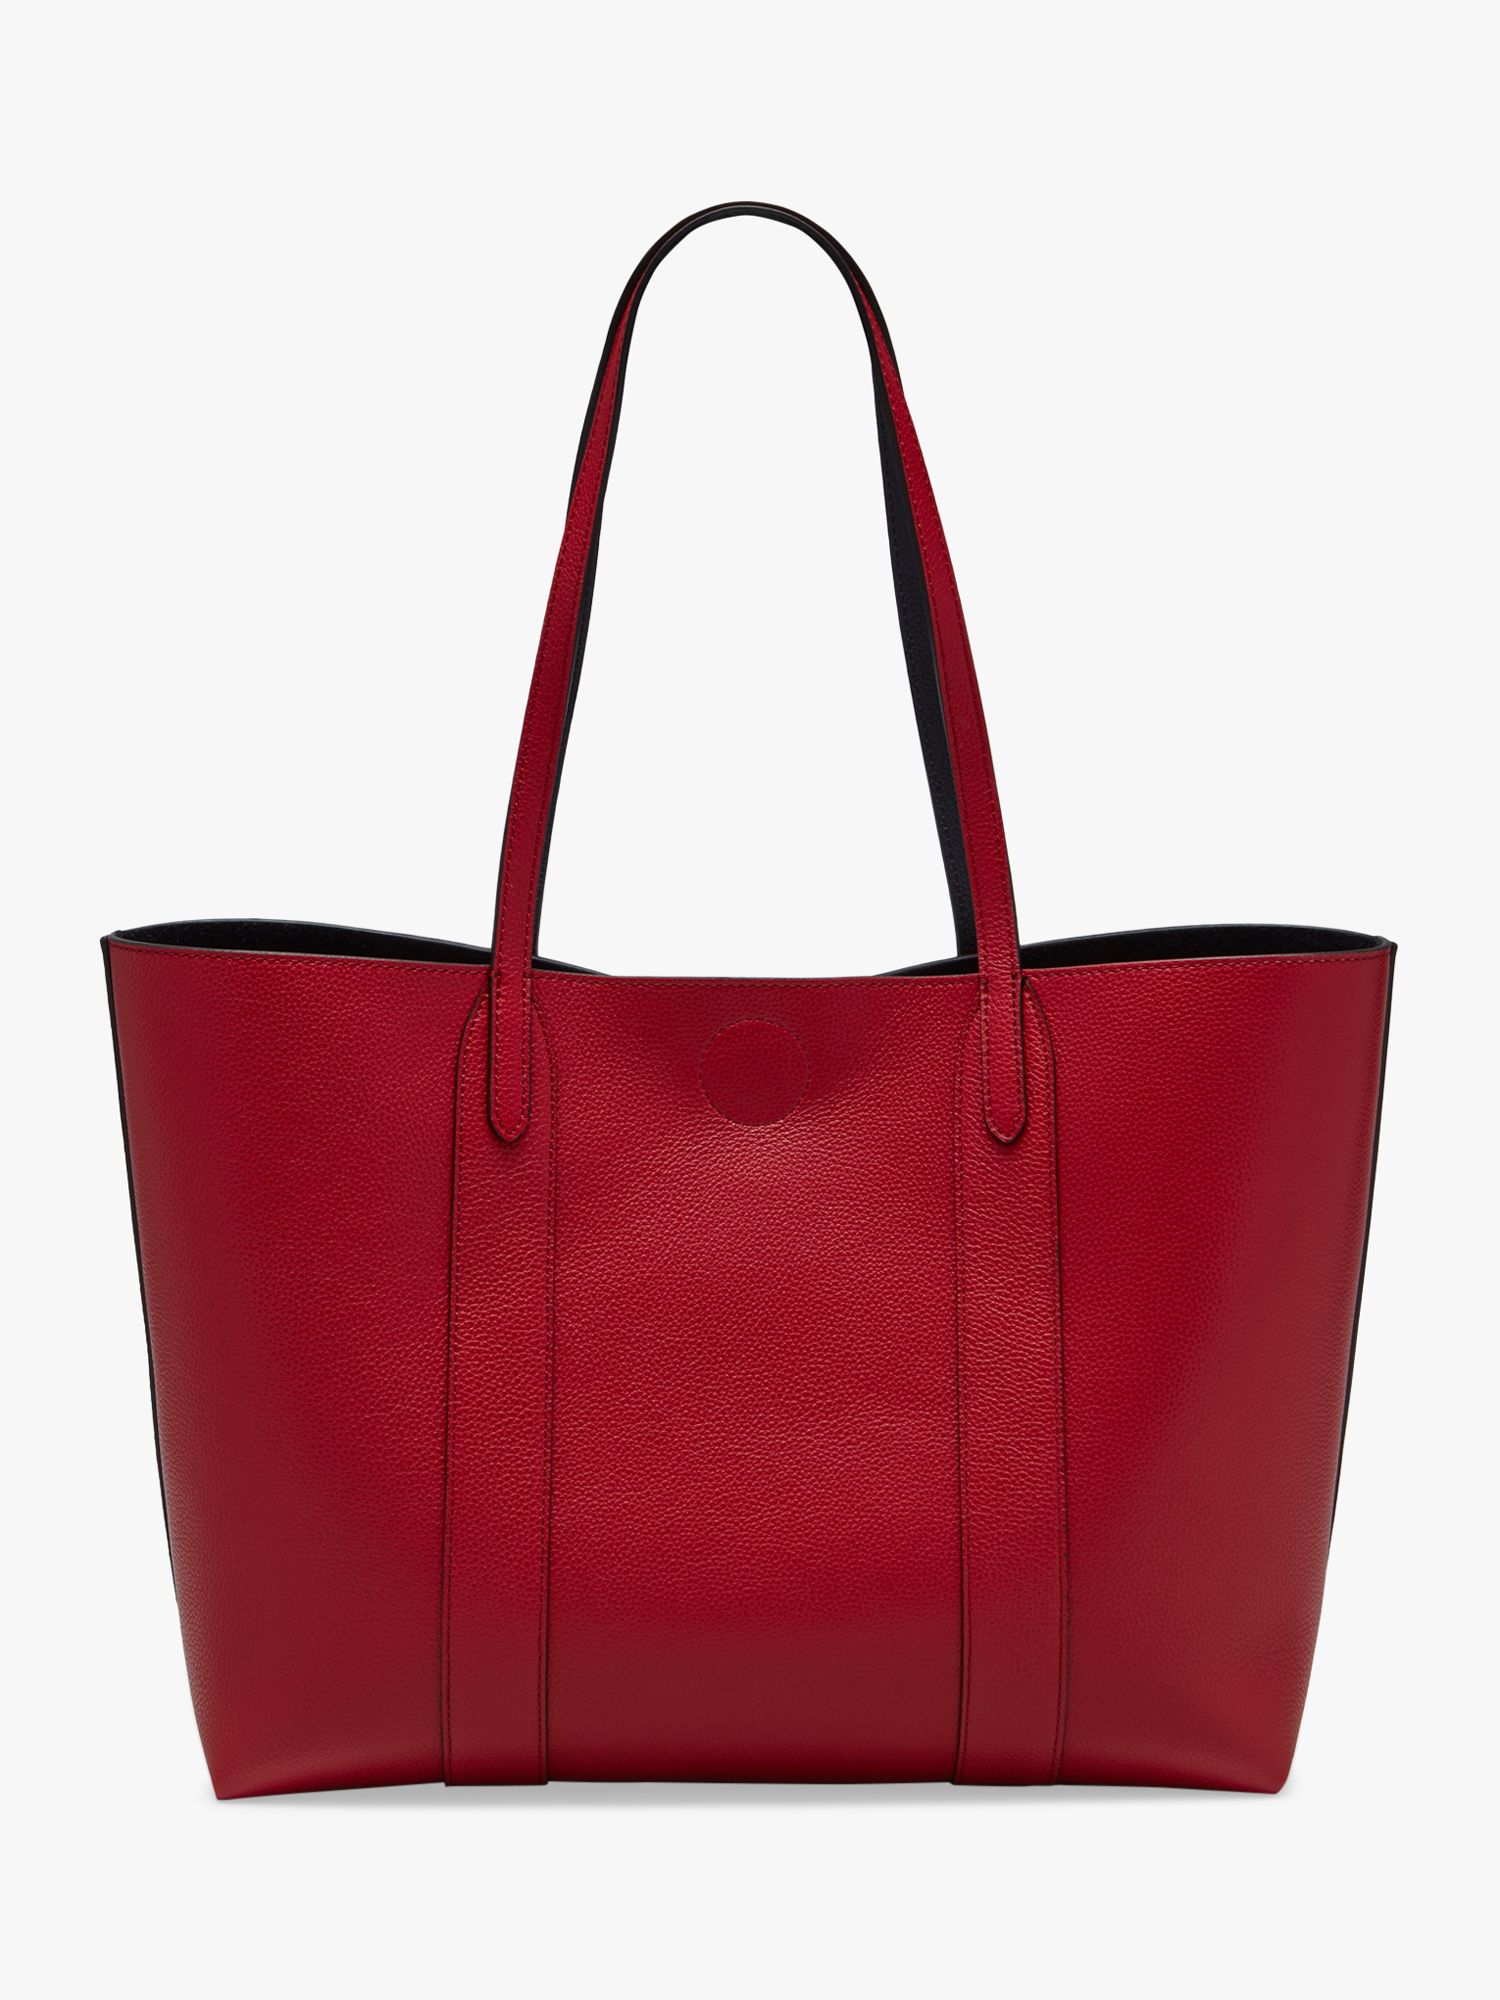 Mulberry Bayswater Small Classic Grain Leather Tote Bag, Scarlet at John Lewis & Partners